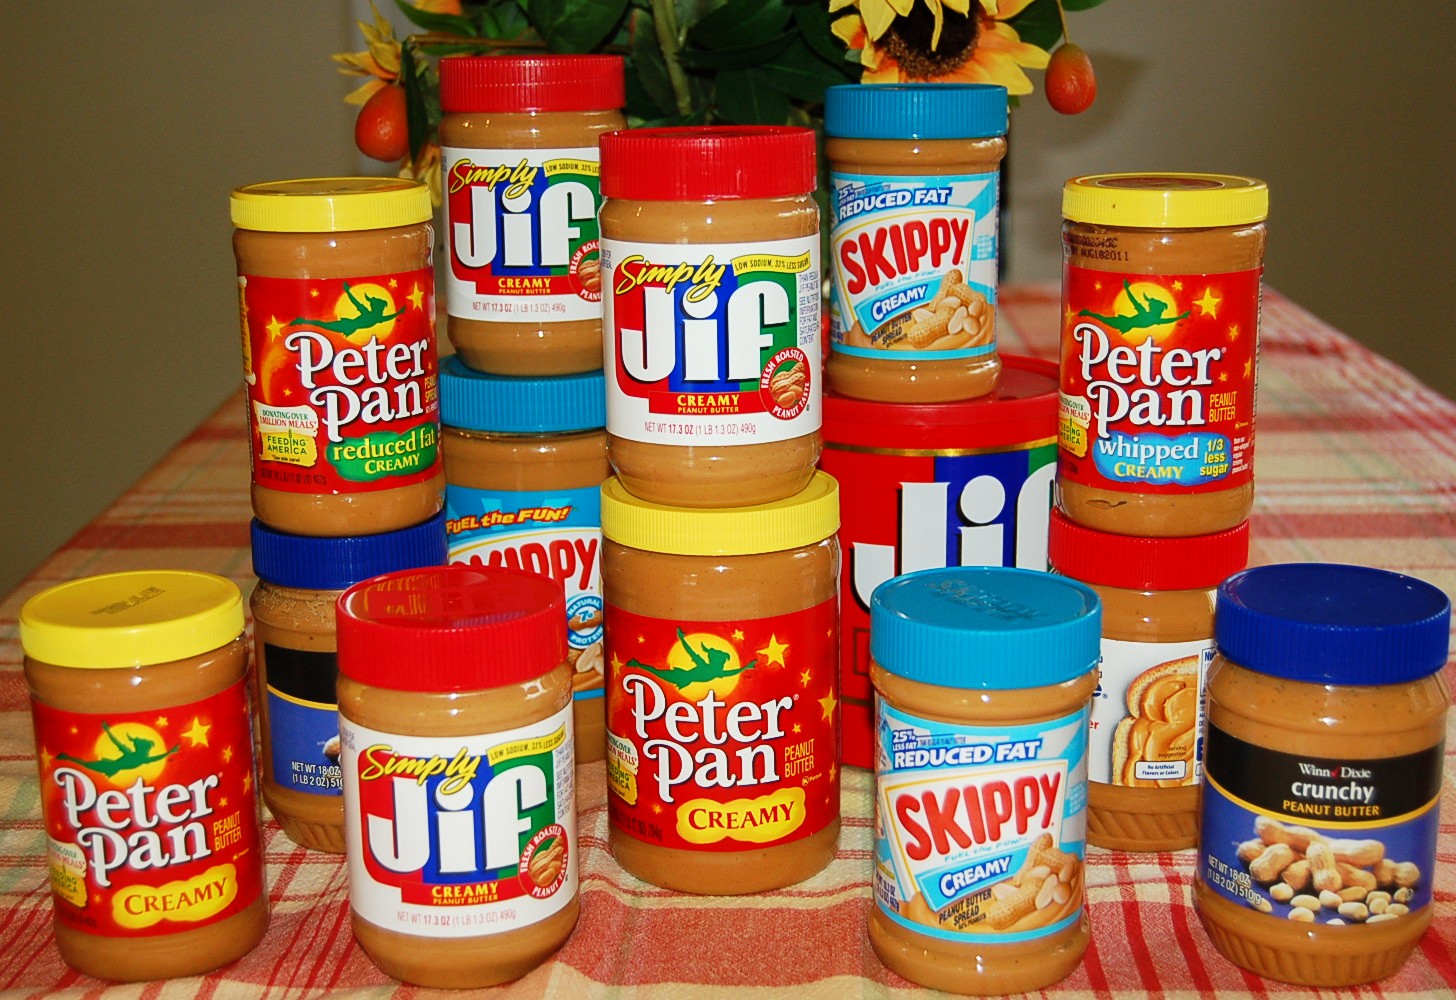 Take the Peanut Butter Challenge!  Donate jars of unopened peanut butter to local food pantries through your County Extension Office.